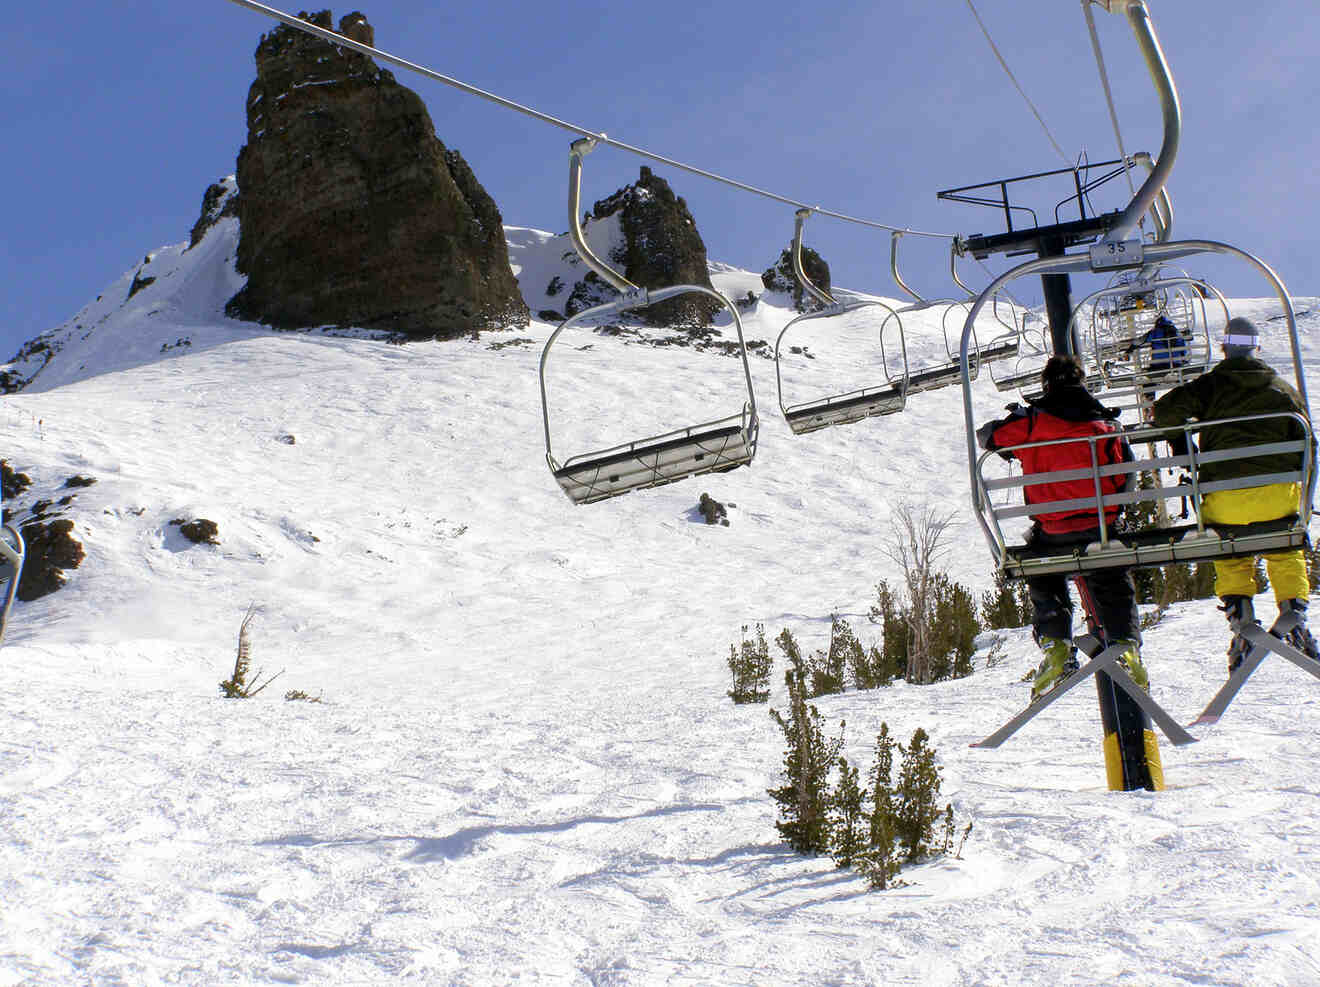 People riding on a ski lift in snowy mountains